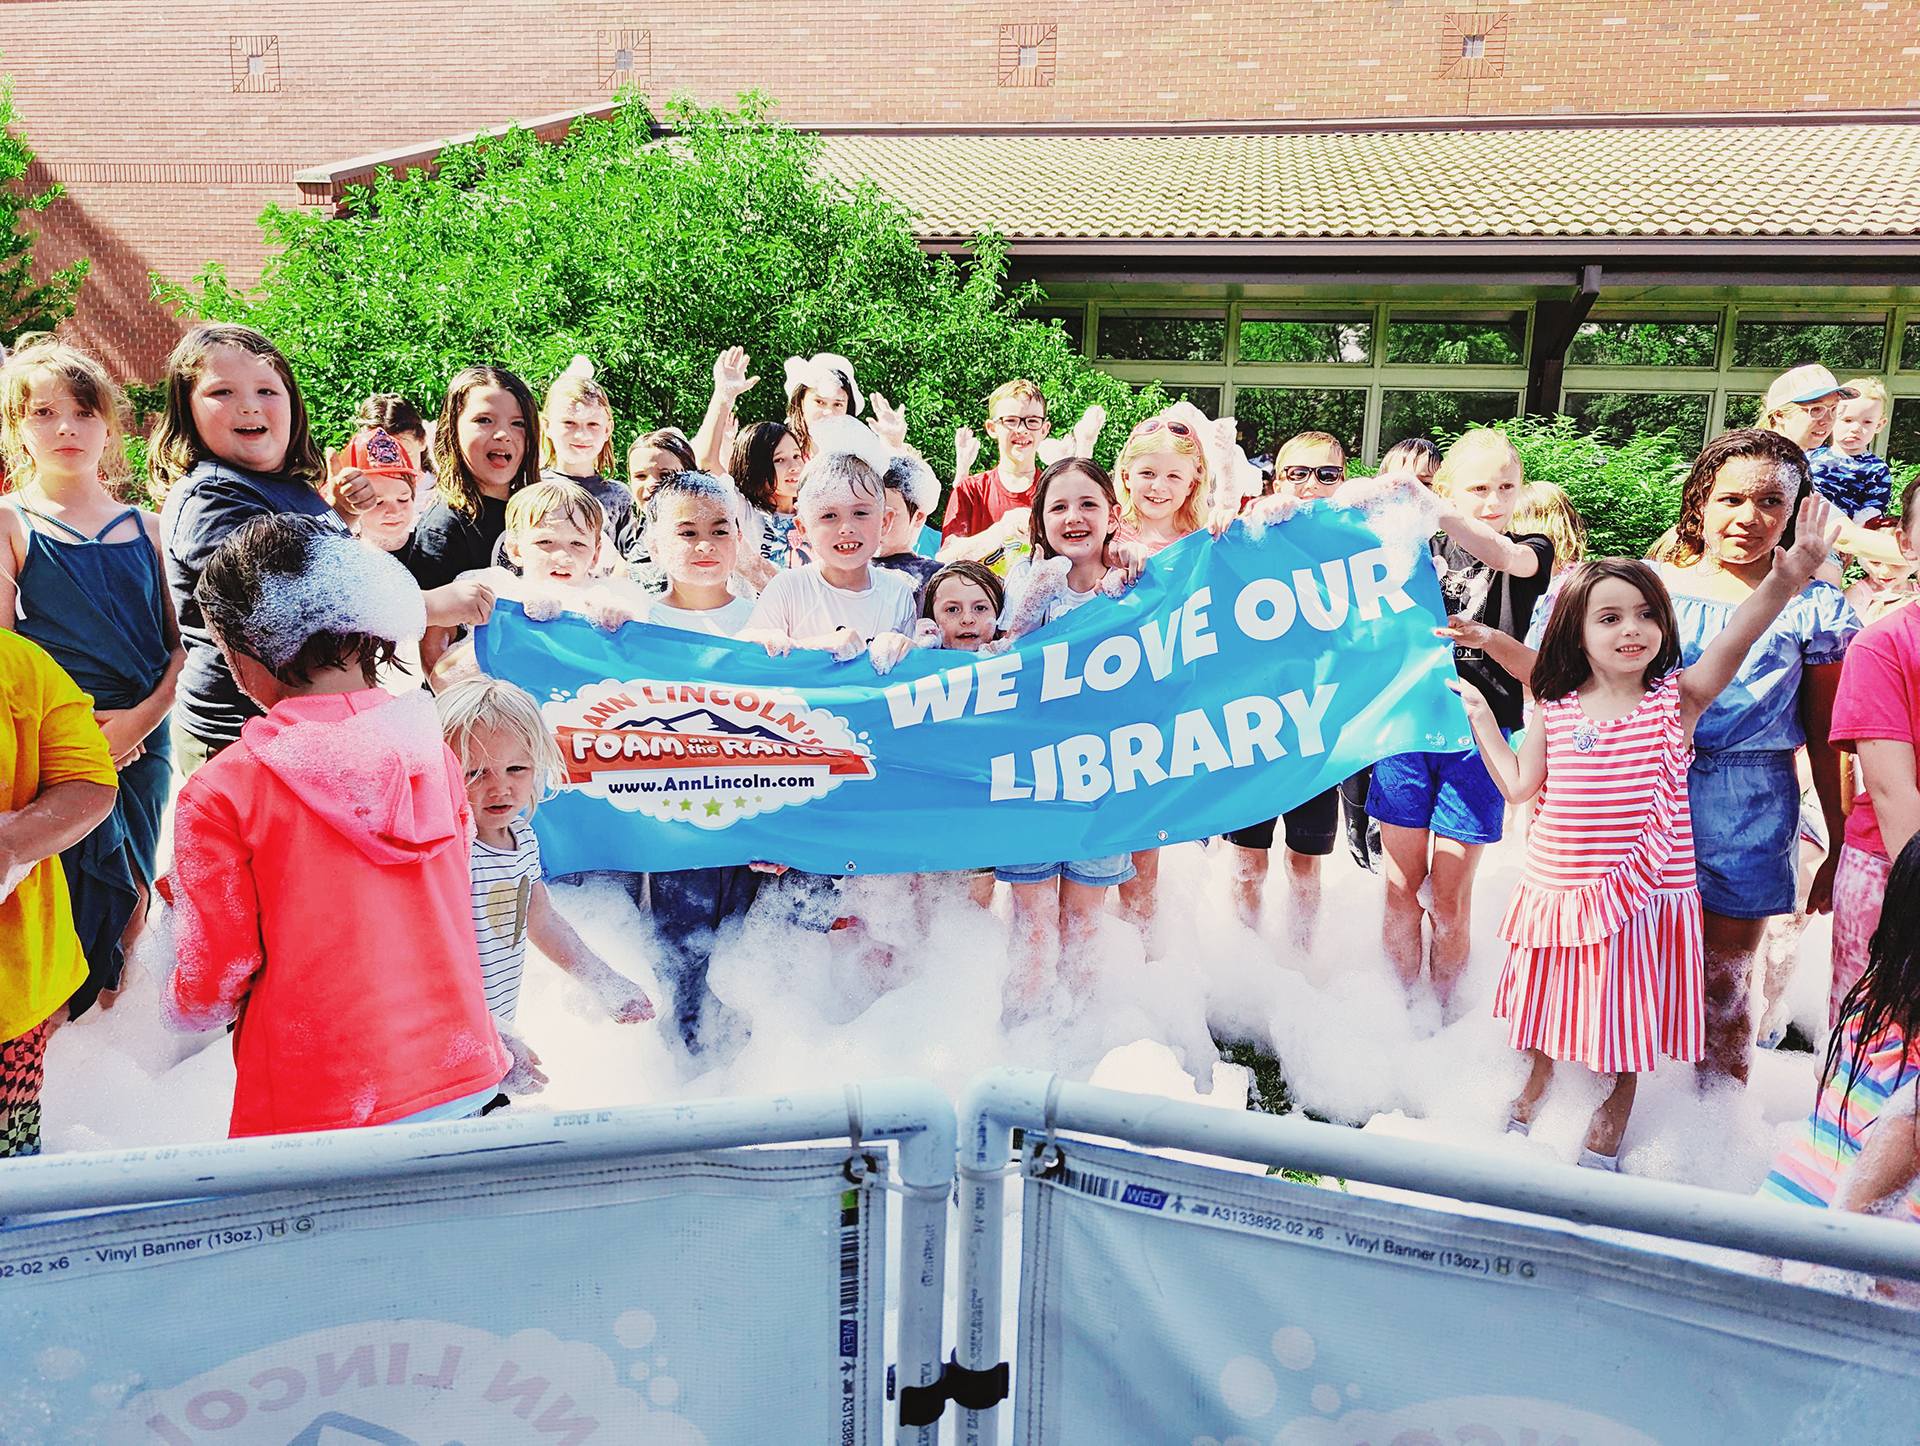 Large group of children standing in bubbles and holding a sign that reads ‘We love our library’